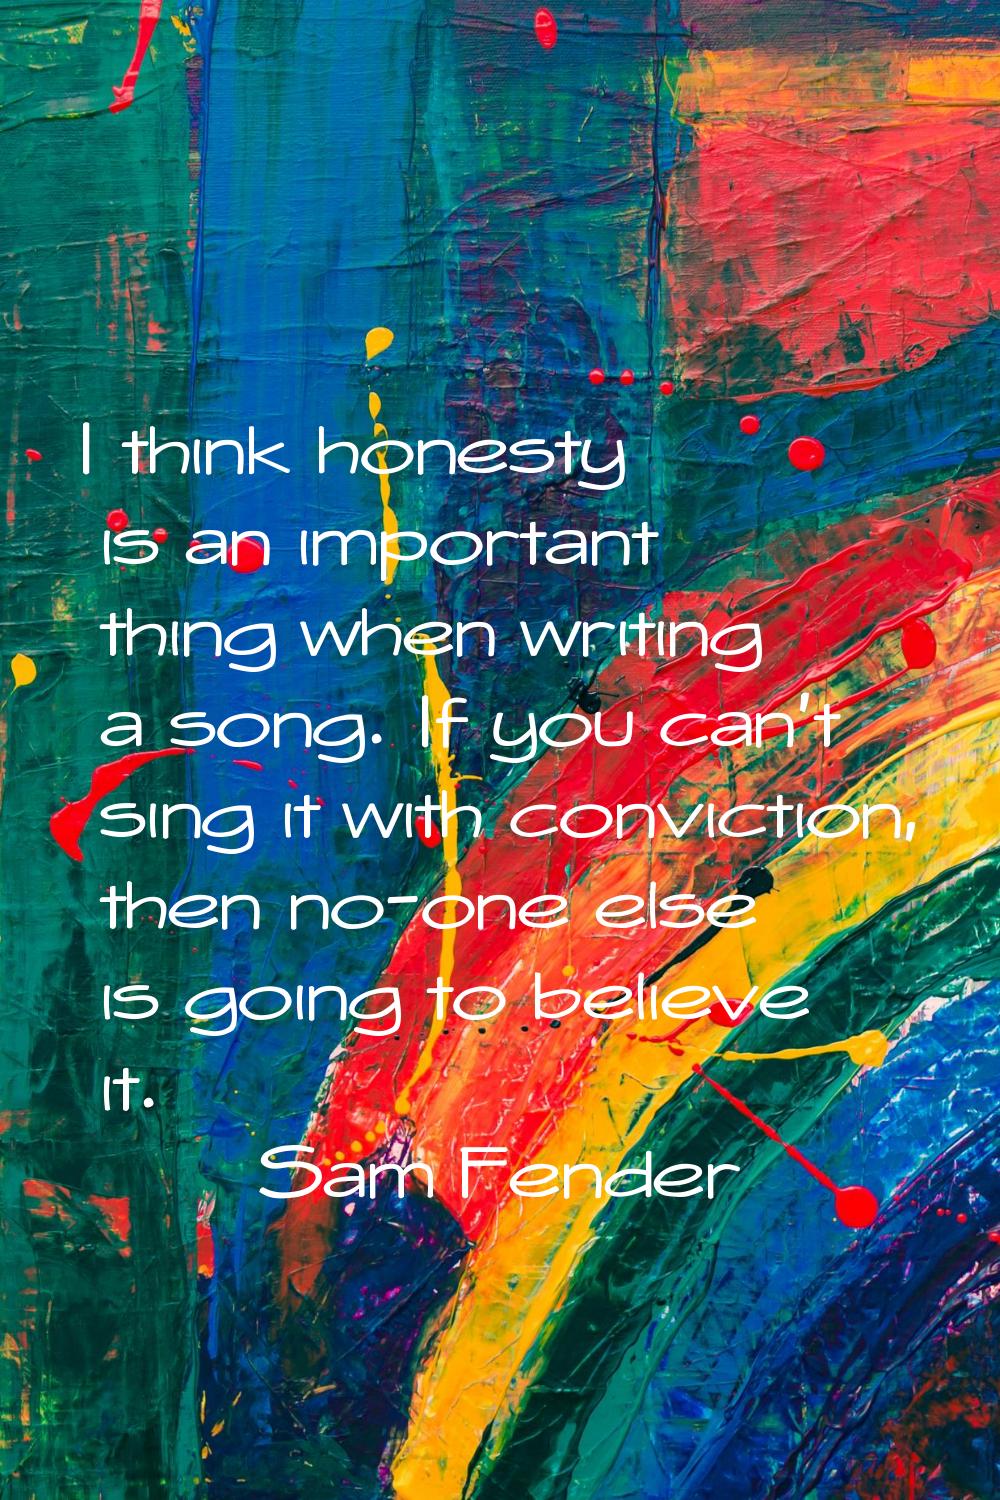 I think honesty is an important thing when writing a song. If you can't sing it with conviction, th